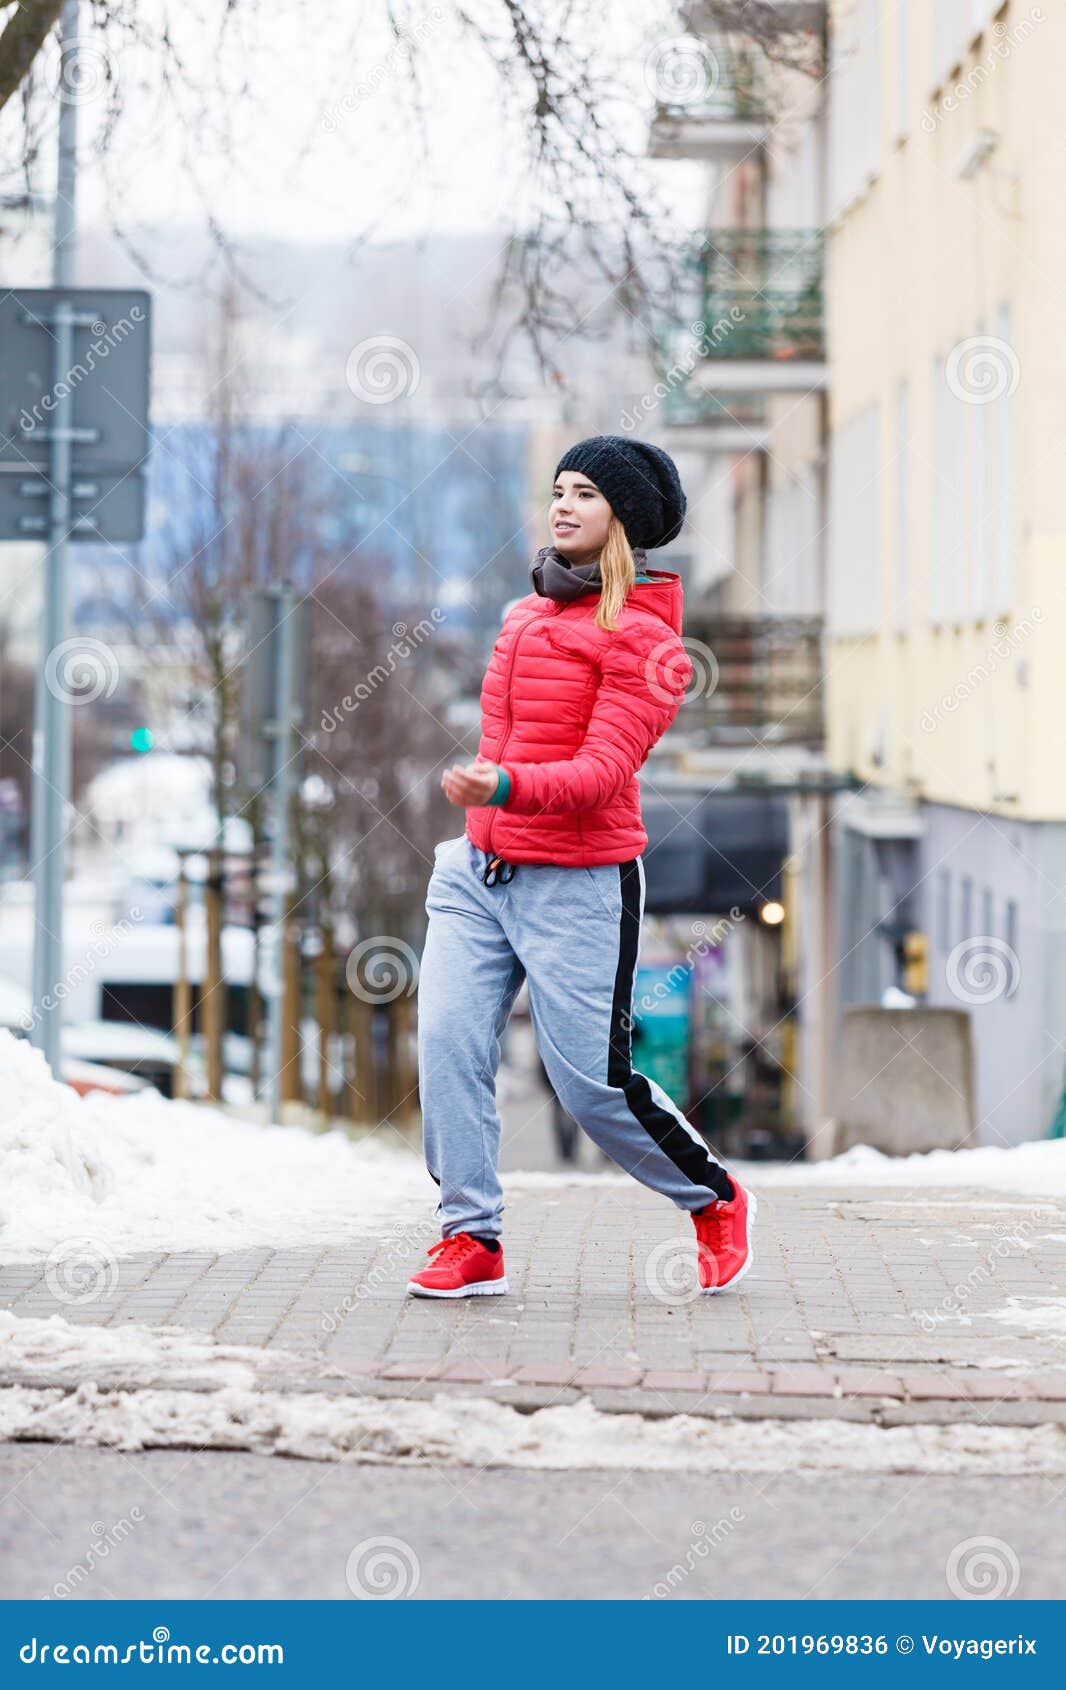 Woman Wearing Sportswear Exercising Outside during Winter Stock Photo -  Image of city, practice: 201969836